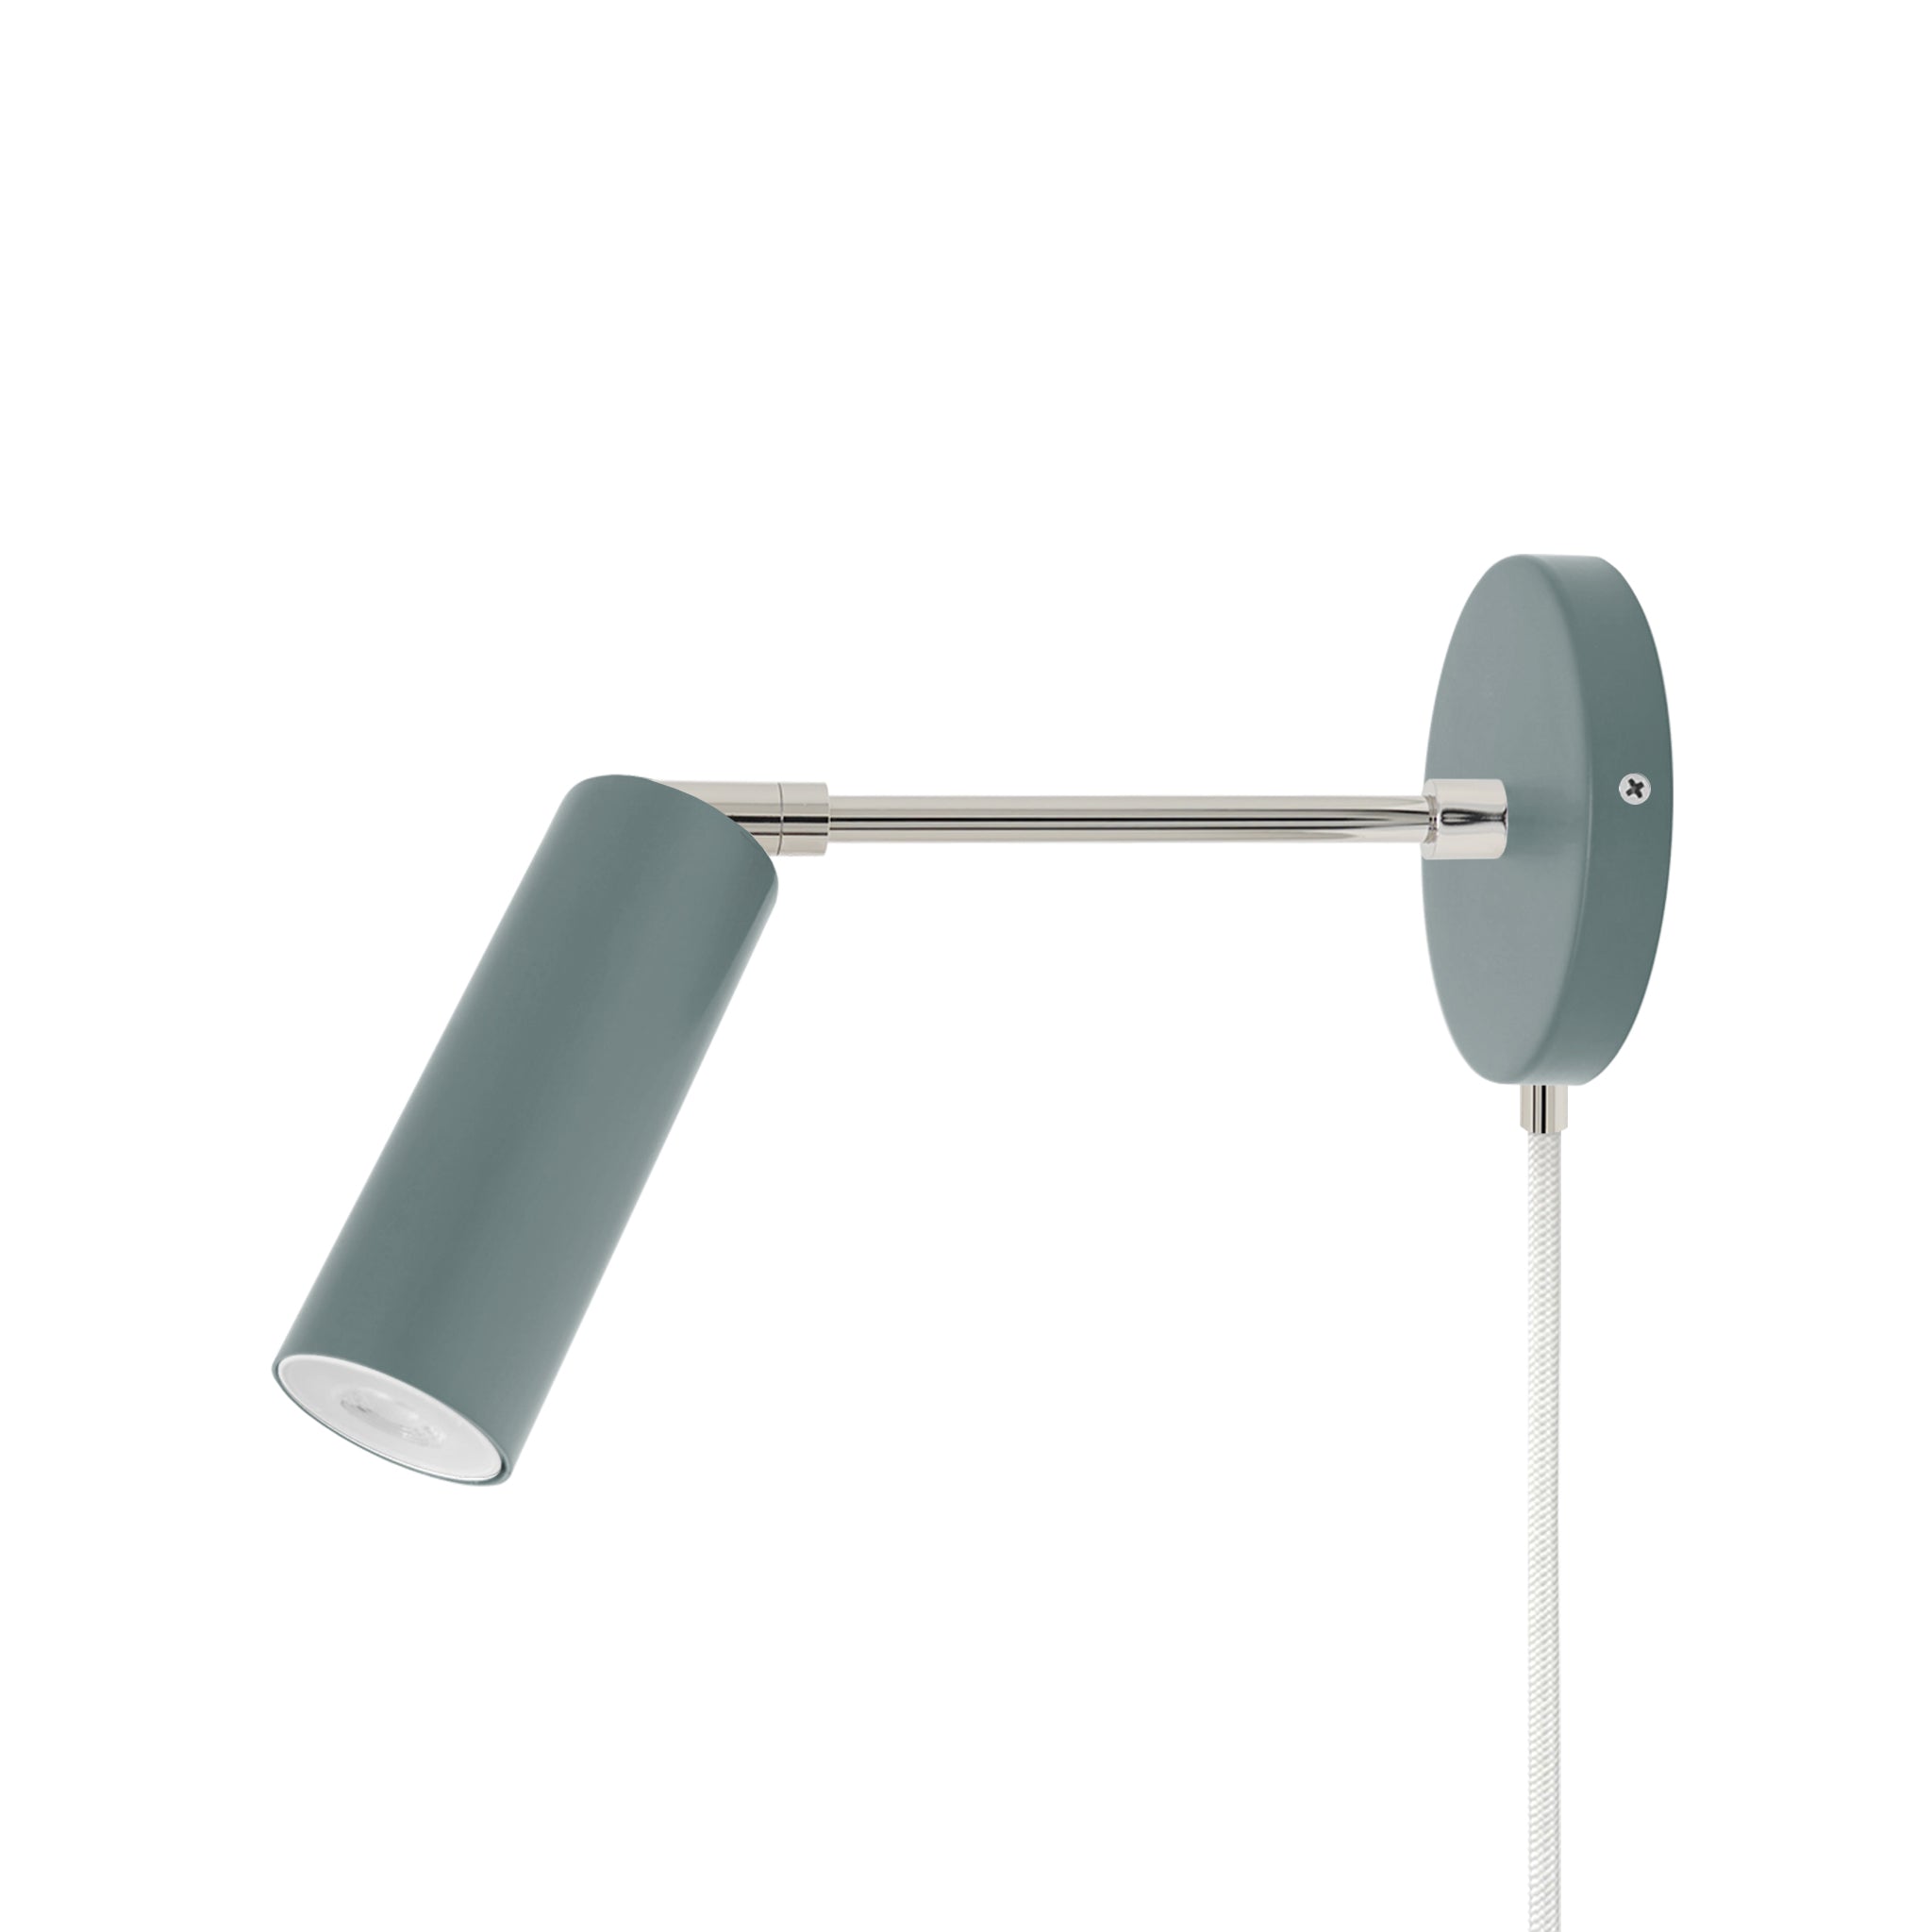 Nickel and python green color Reader plug-in sconce 6" arm Dutton Brown lighting